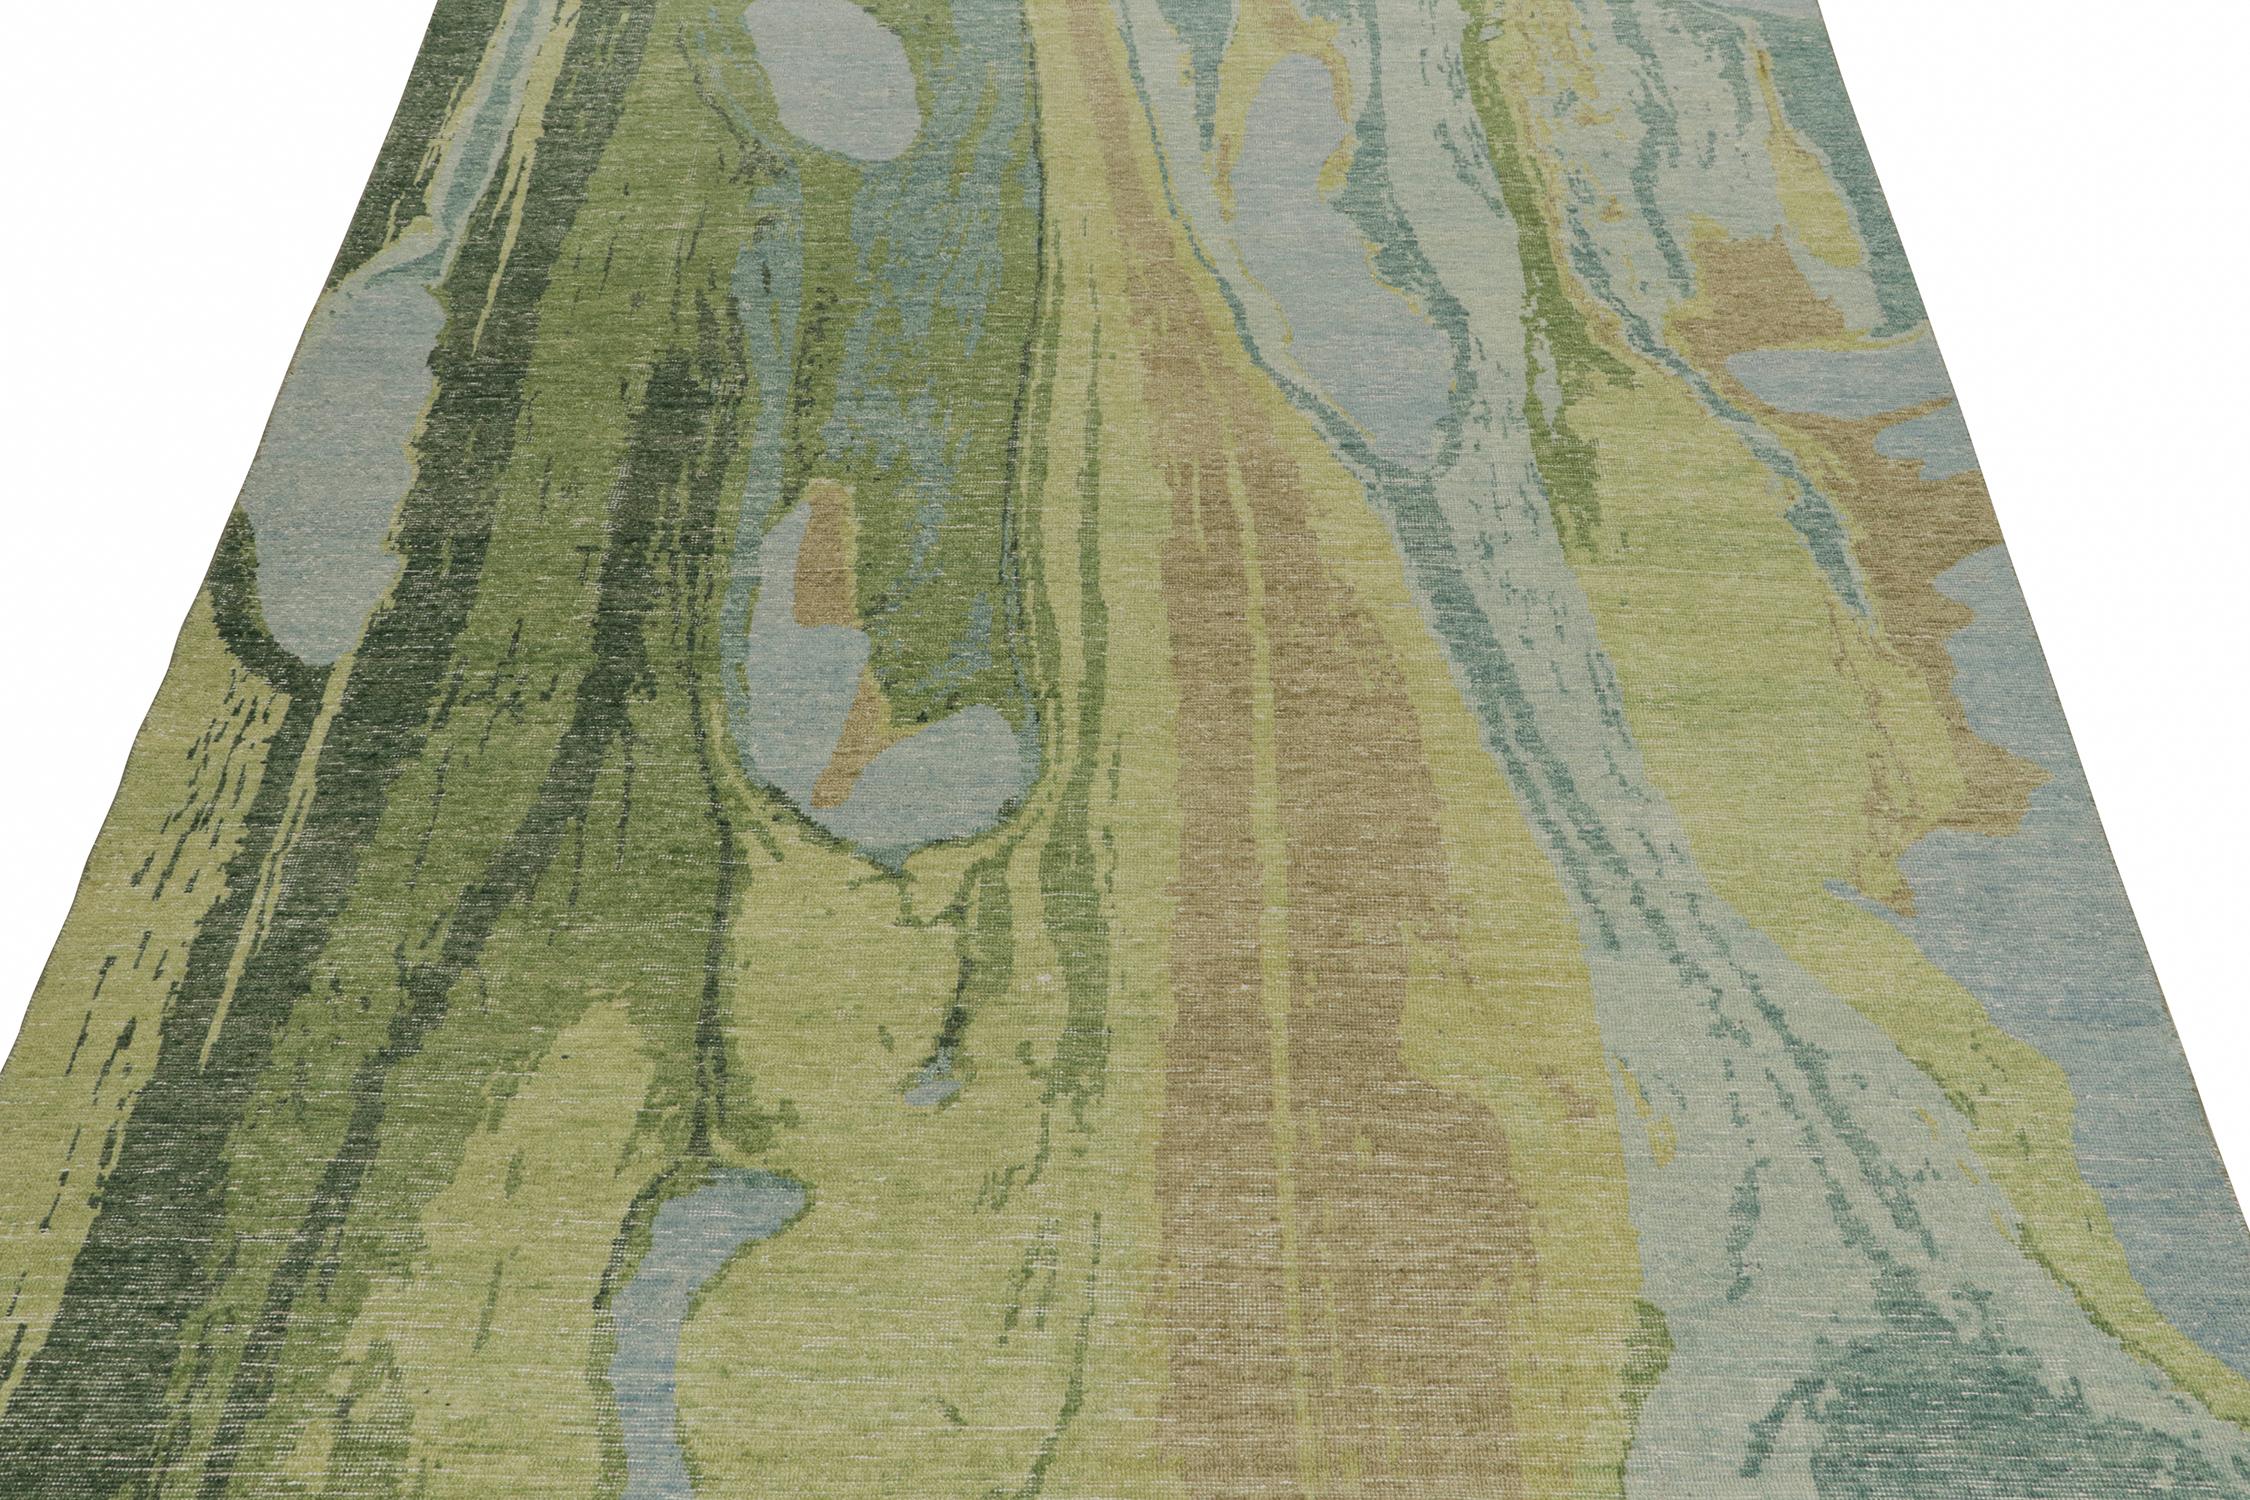 This contemporary 8x10 abstract rug is a new addition to the Homage Collection by Rug & Kilim.

Further On the Design:

Hand-knotted in wool and cotton, this design evokes a fluid play blue, green, beige, and gold paint strokes. Keen eyes might